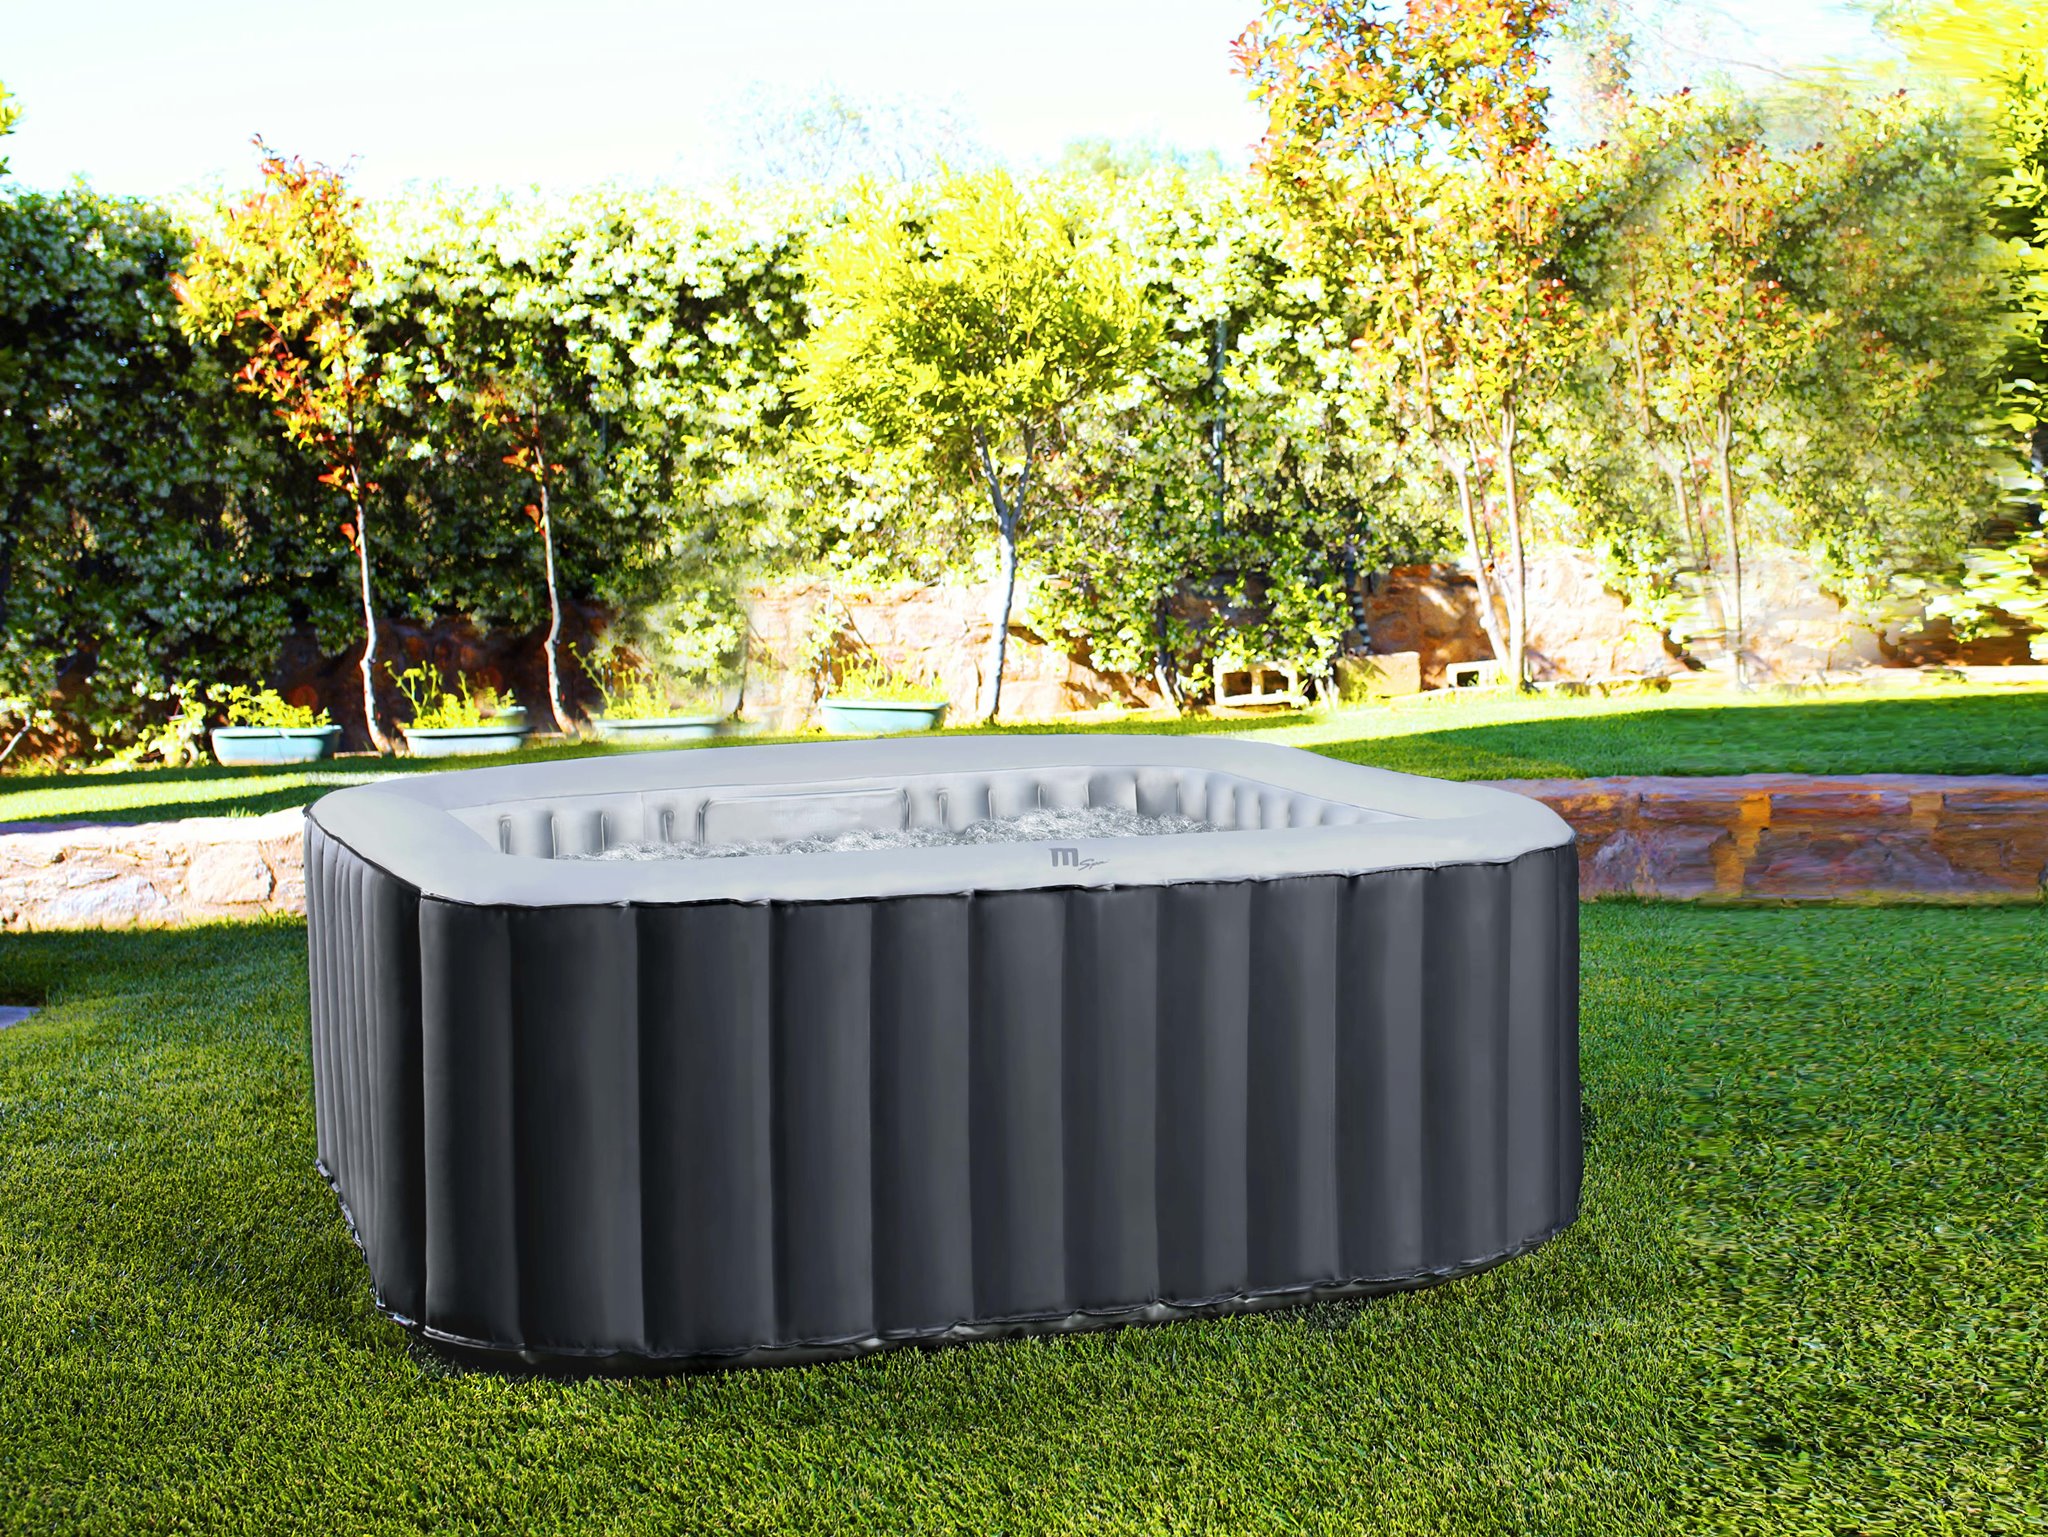 Sit back and relax in your high-quality MSpa Delight Series Alpine inflatable spa. 

SPECIFICATIONS
158x158x68cm
108 Air... » Outdoor Furniture Fuengirola, Costa Del Sol, Spain